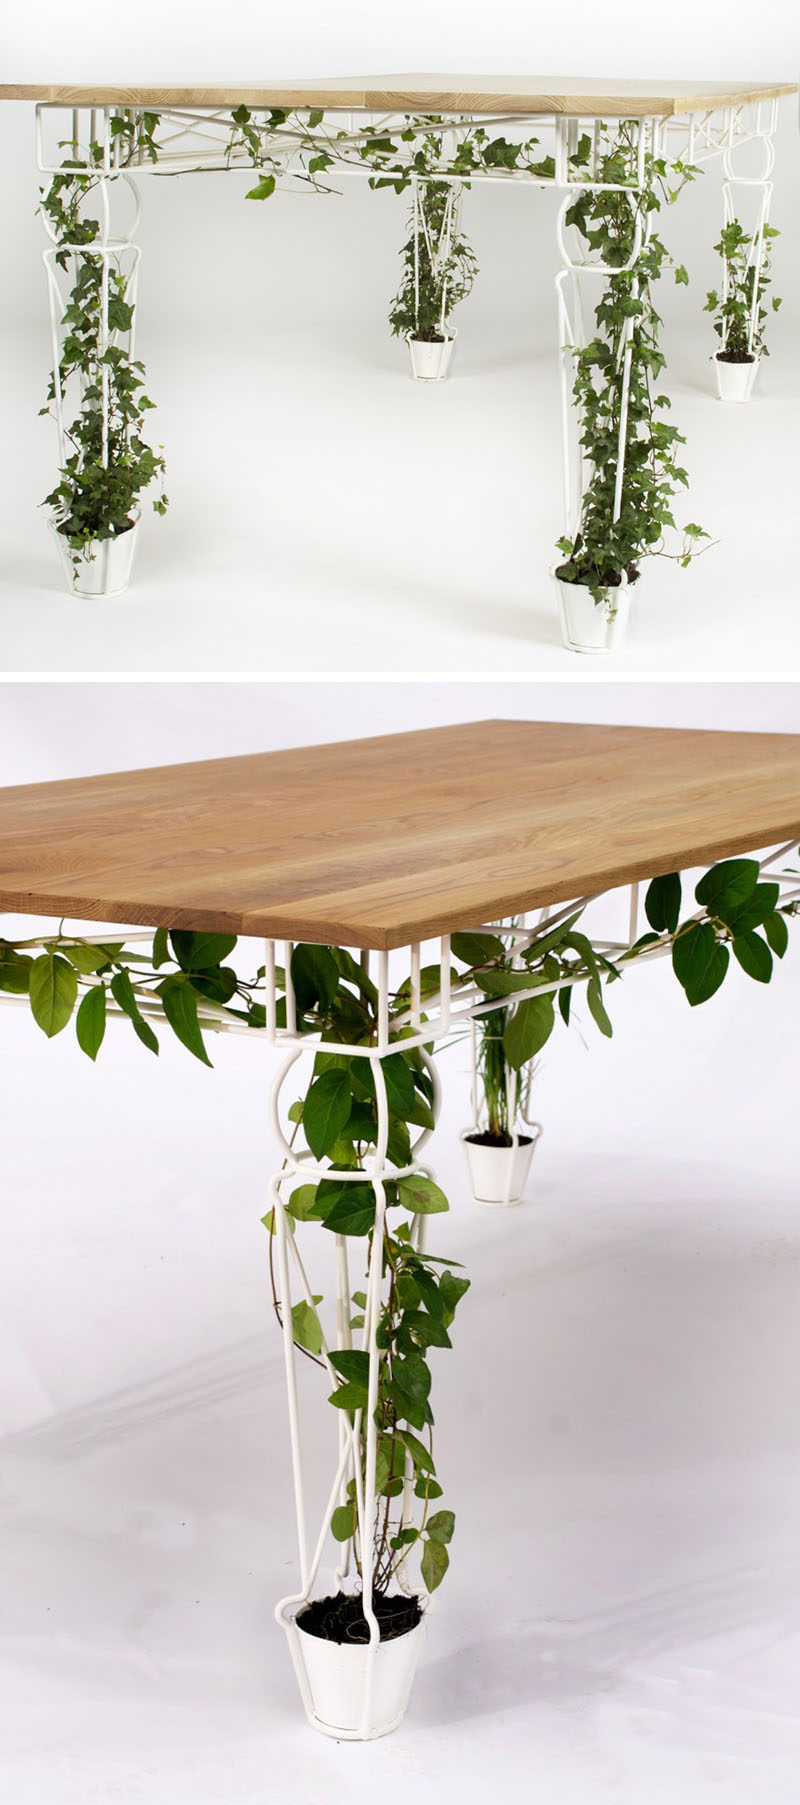 6 Ways To Include Indoor Vines In Your Interior | Keep your home office functional but brimming with plant life by including one of these desks that feature legs that encourage your plants to grow tall without taking up too much space.